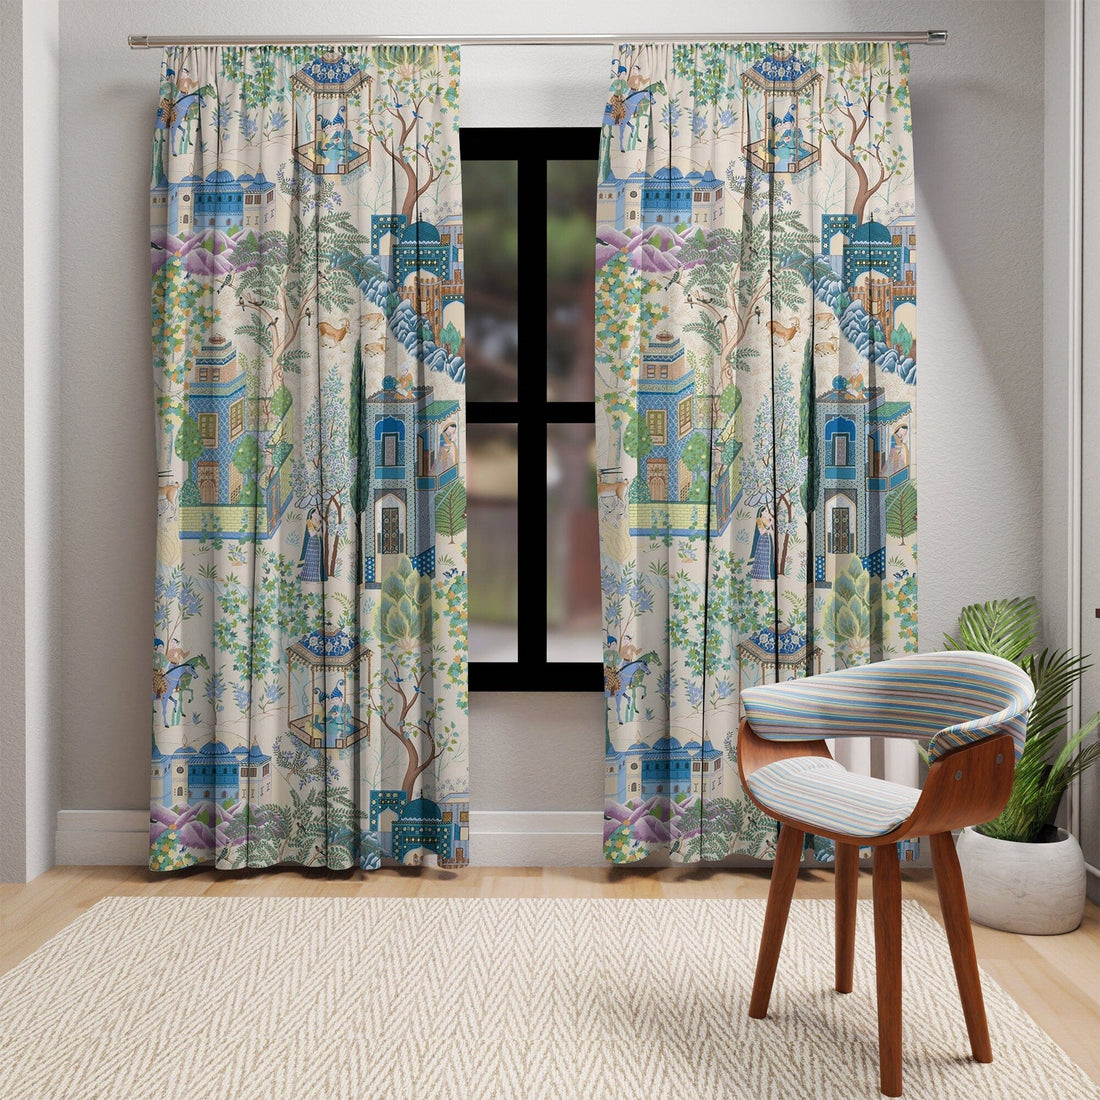 Kate McEnroe New York Vintage French Toile De Jouy Window Curtains, Blue, Green Floral Print, Traditional Asian Country Scene, Rustic Chic Window CoveringsWindow CurtainsW3D - FRE2 - CHI2 - SH2